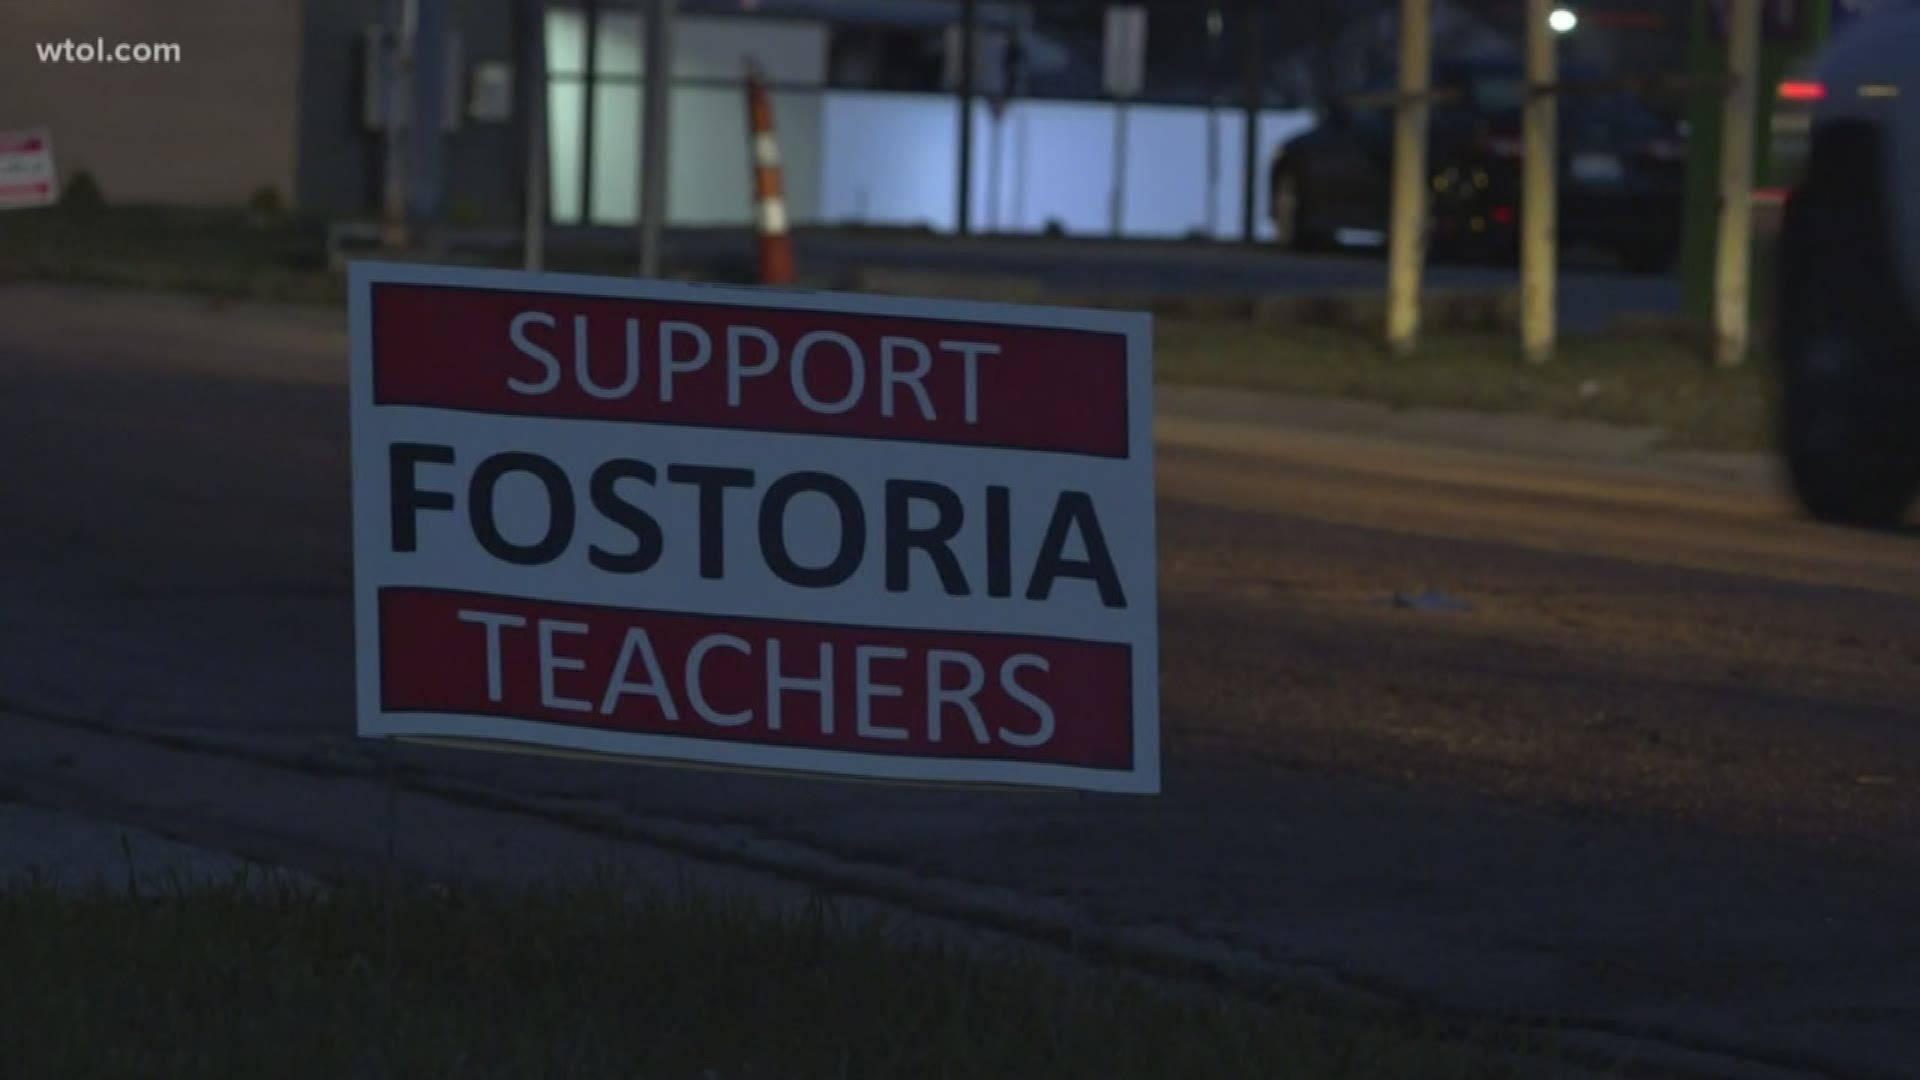 After a months-long standstill in negotiations, Fostoria school board members approved an agreement that once again allows educators to work with a contract.